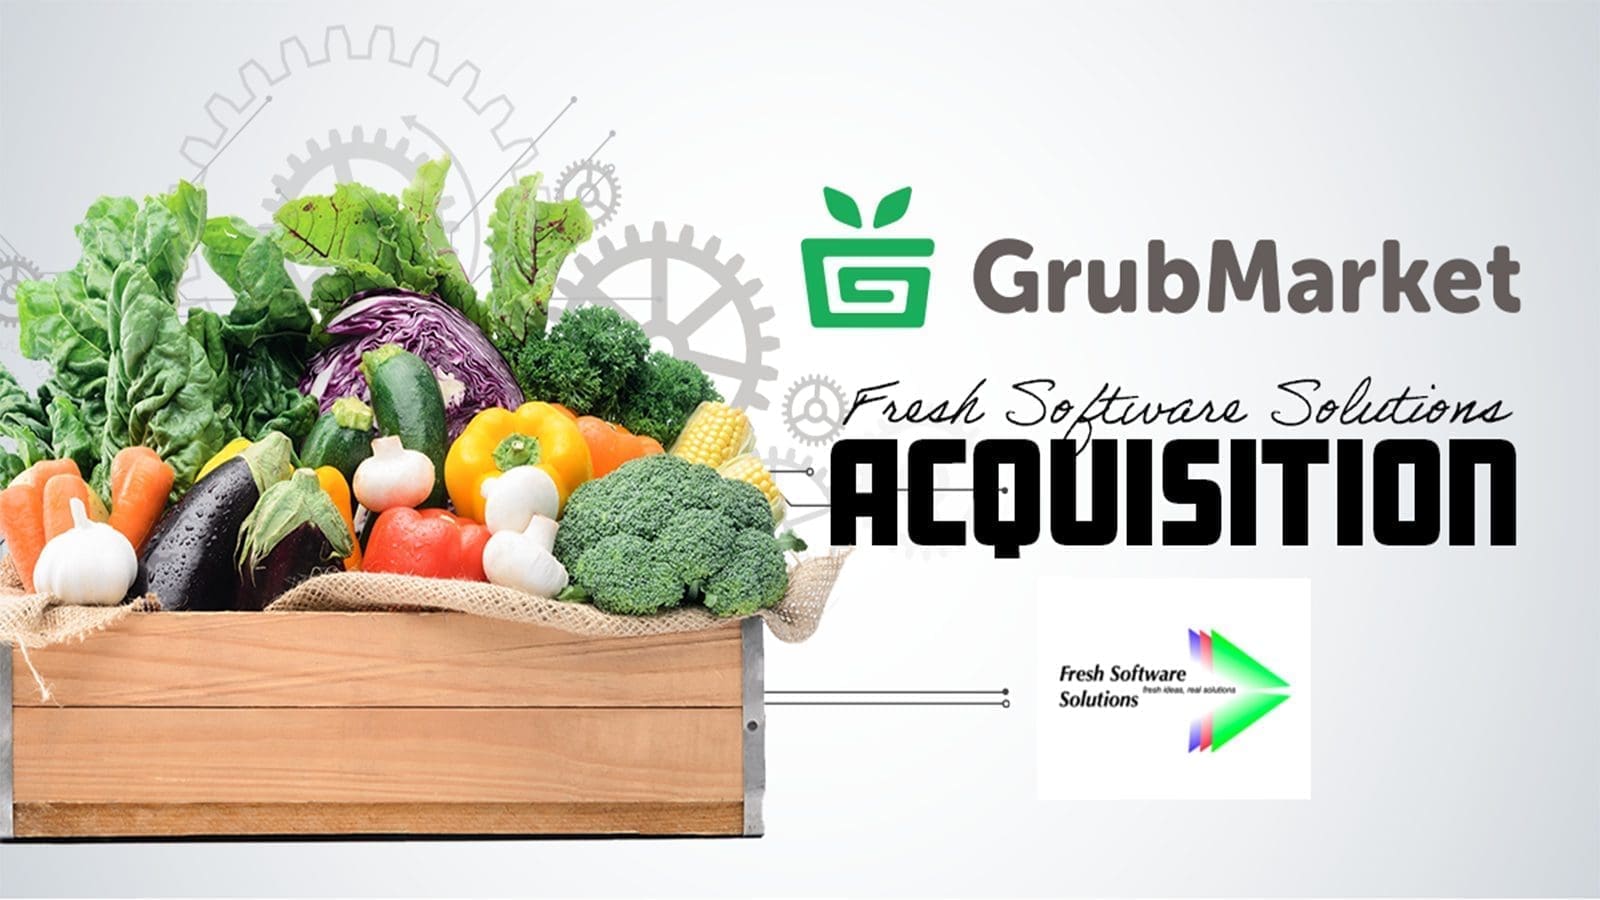 GrubMarket acquires software provider Fresh Software Solutions